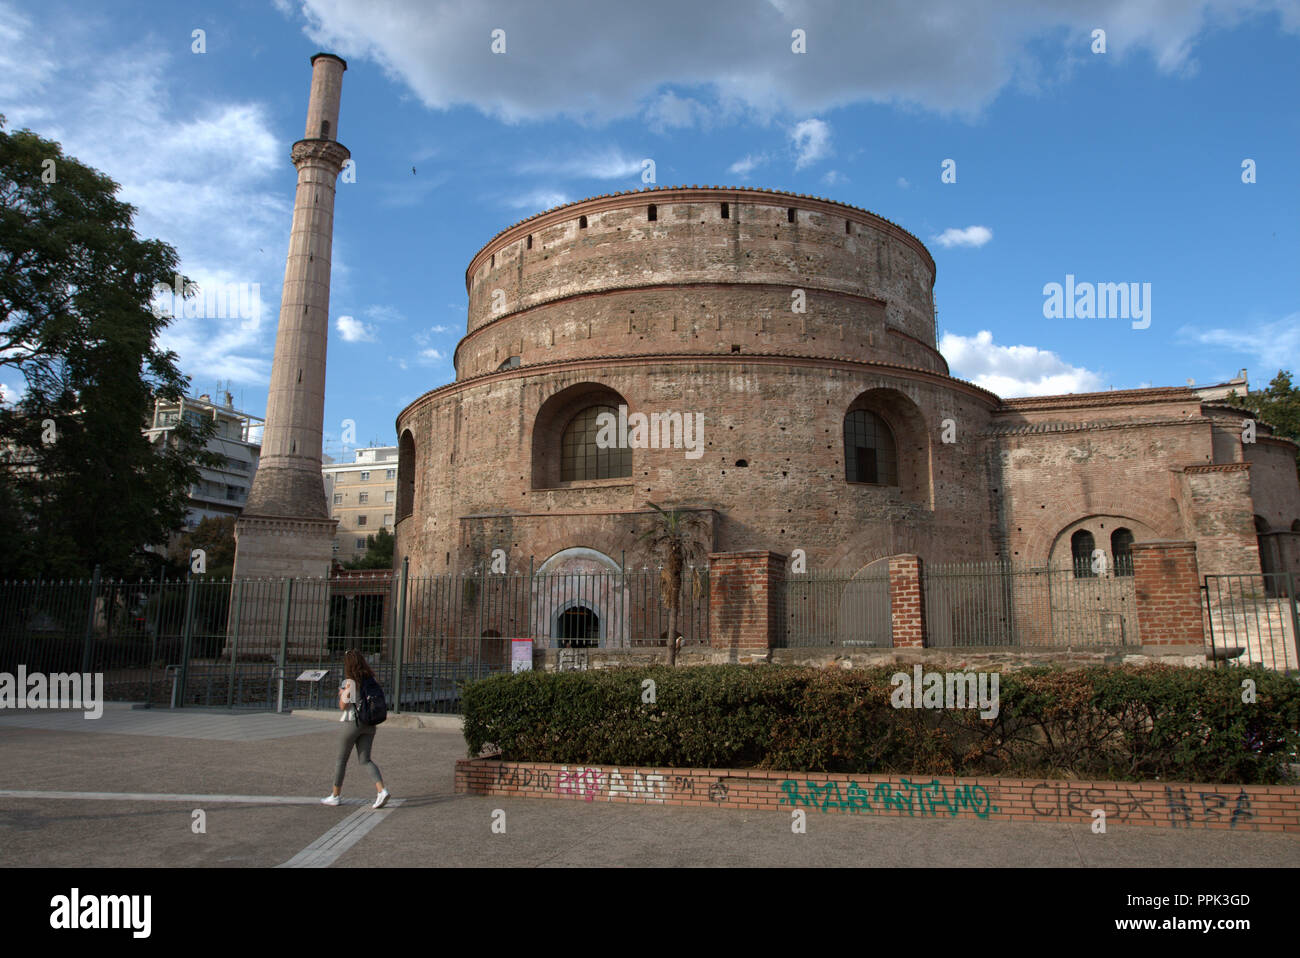 The Rotunda (Rotonda),  an early 4th-century AD monuments in the city of Thessaloniki, in the region of Central Macedonia in northern Greece. Stock Photo